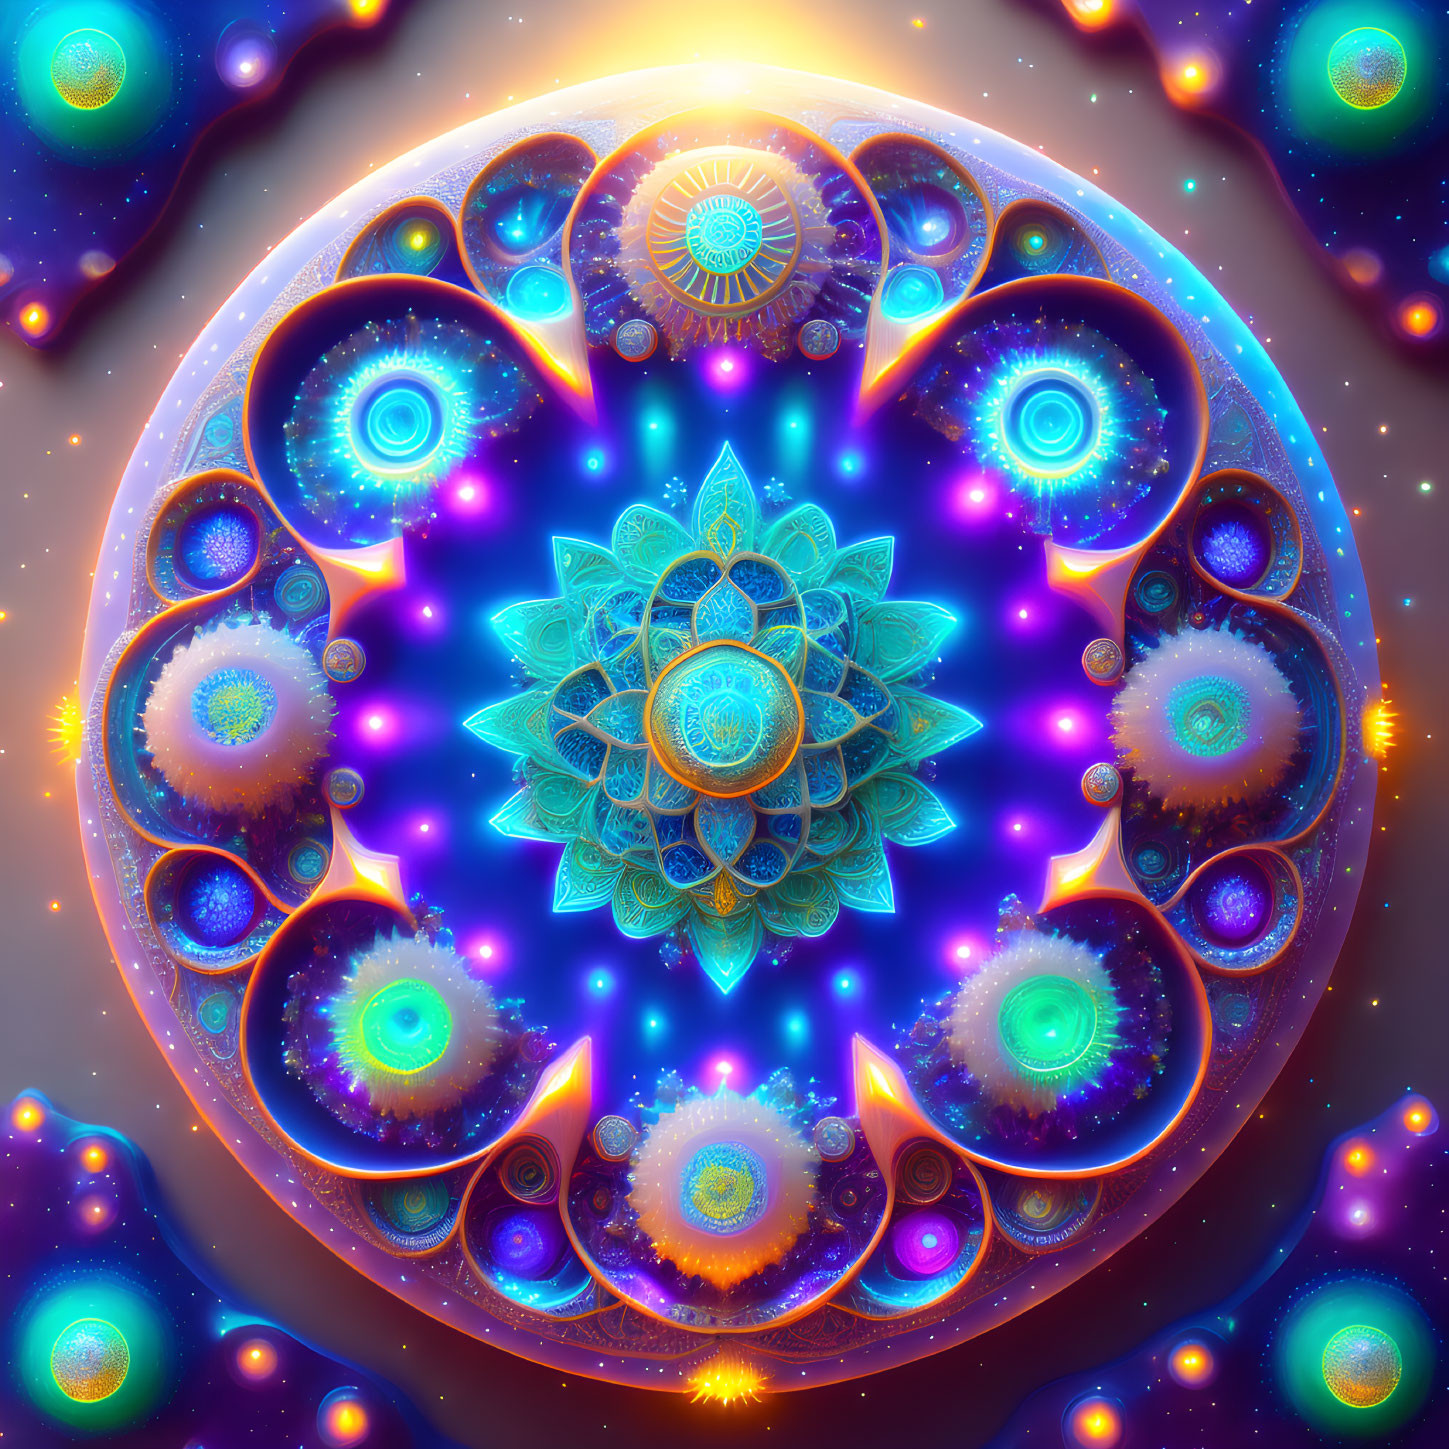 Colorful Fractal Mandala Image with Neon Blues, Purples, and Oranges